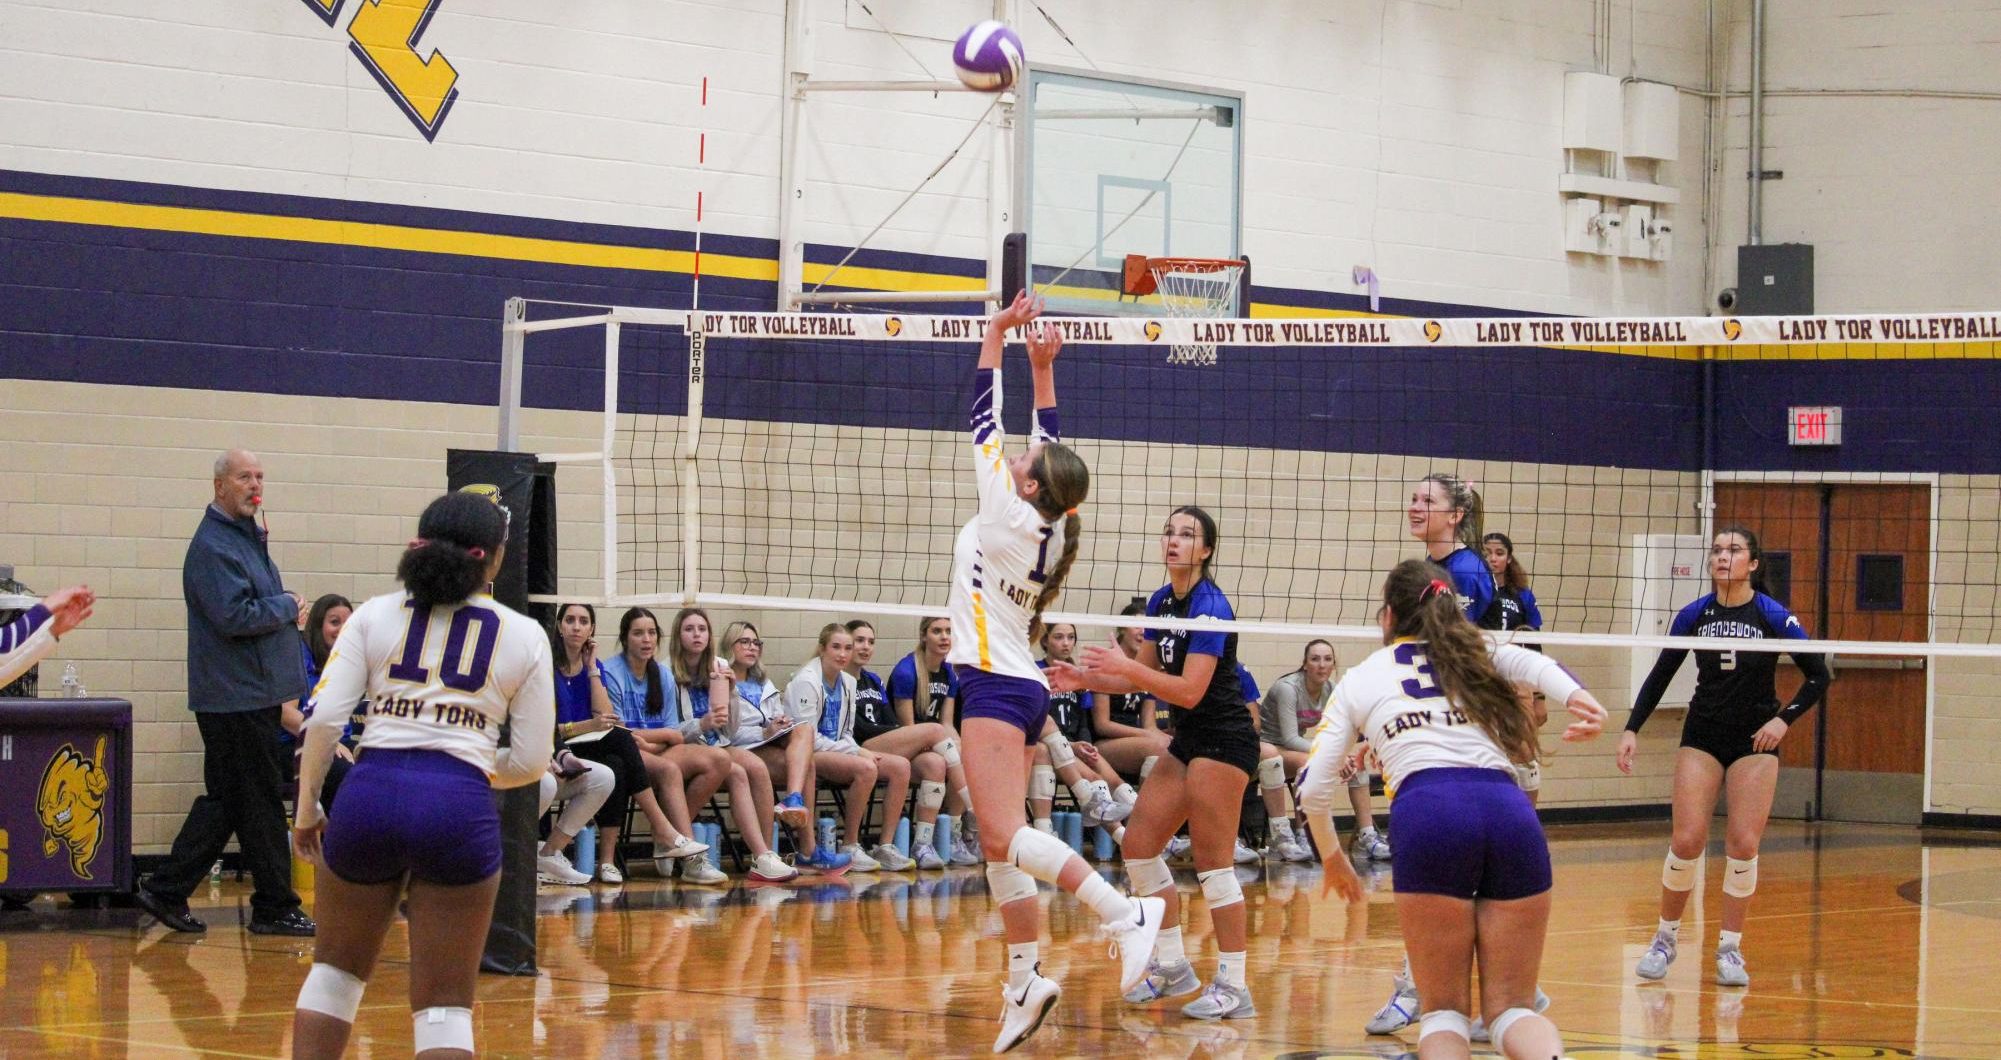 Lady Tors Volleyball Concludes Season with Dominant Victory Over Angleton: Key Players Shine & Seniors Bid Farewell